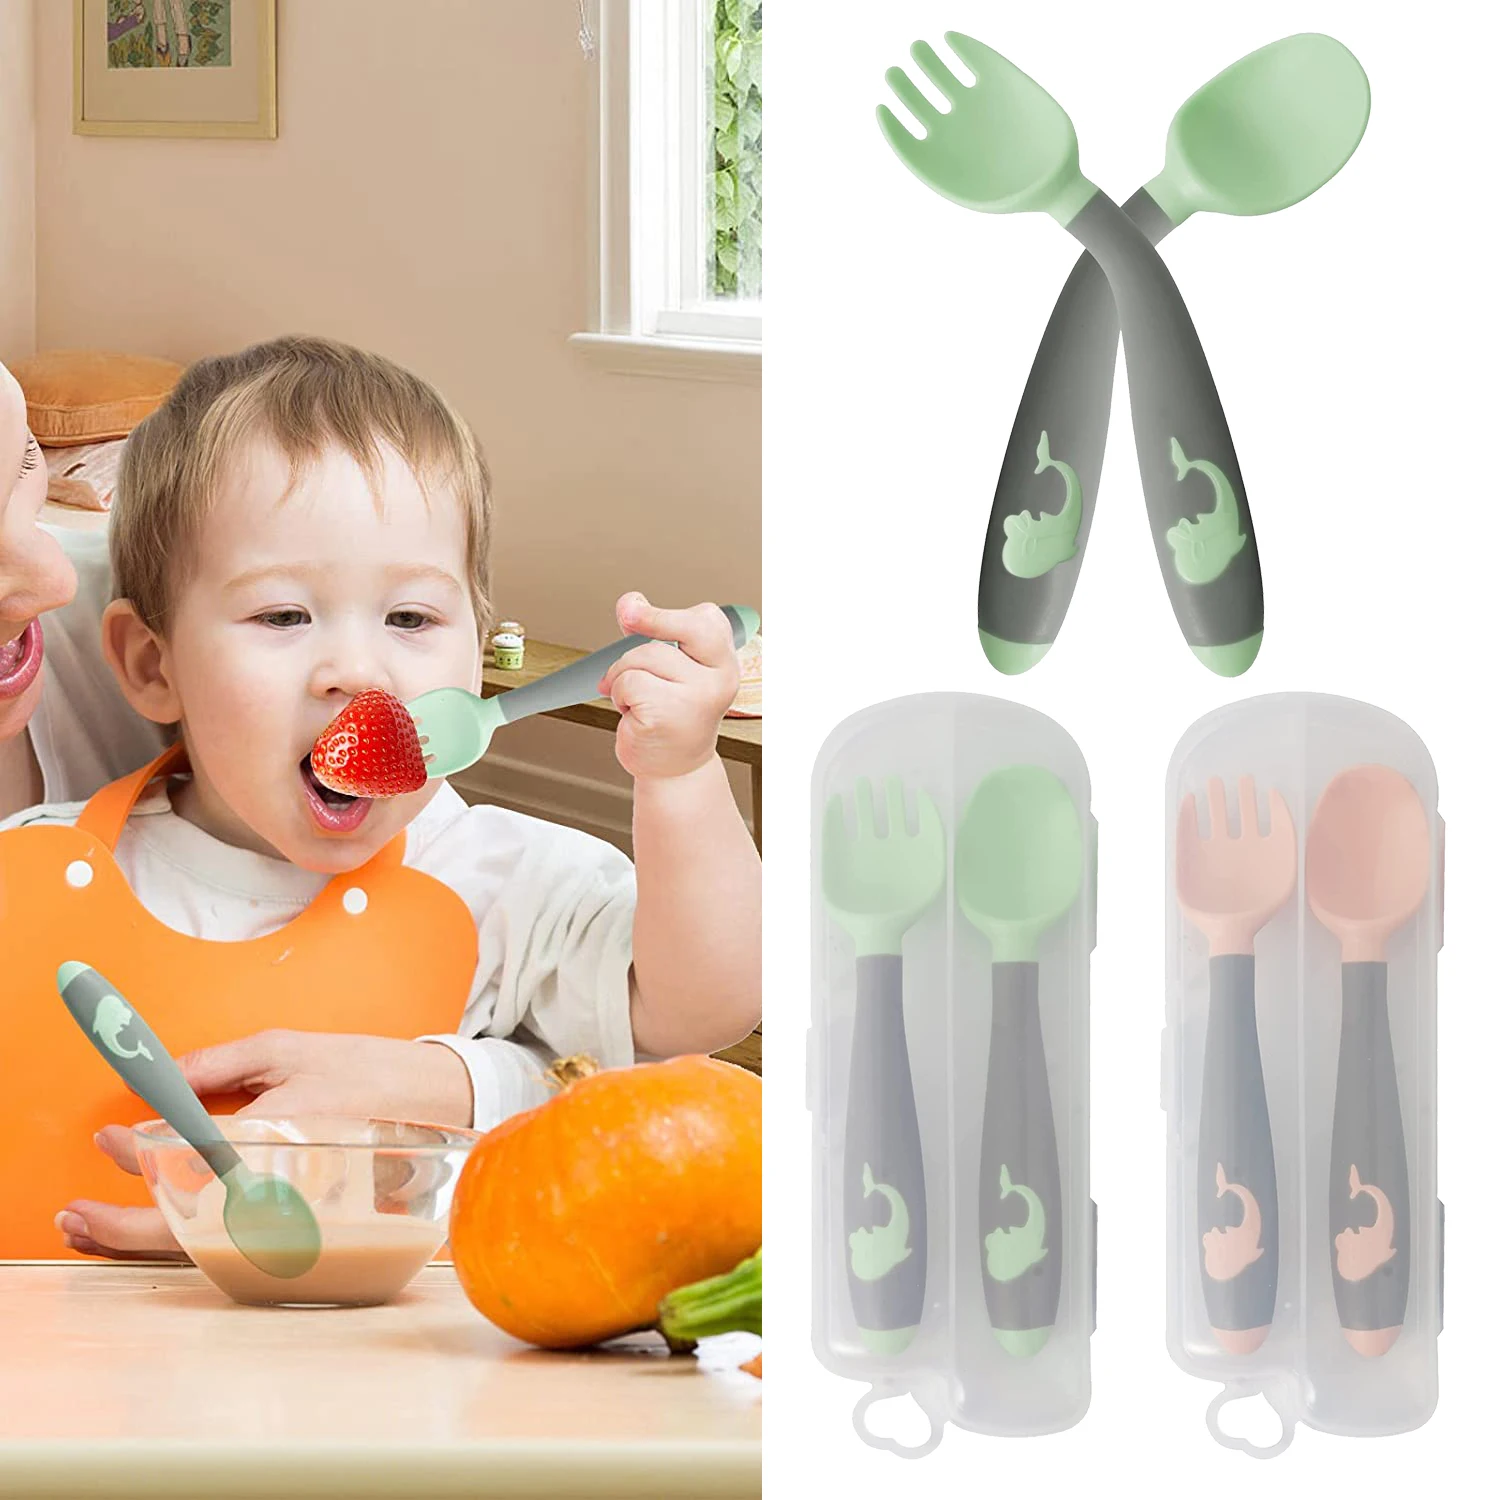 

Bendable Silicone Spoon for Babies BPA Free Utensils Toddler Food Feeding Spoon Learn To Eat Training Fork for Infant Children